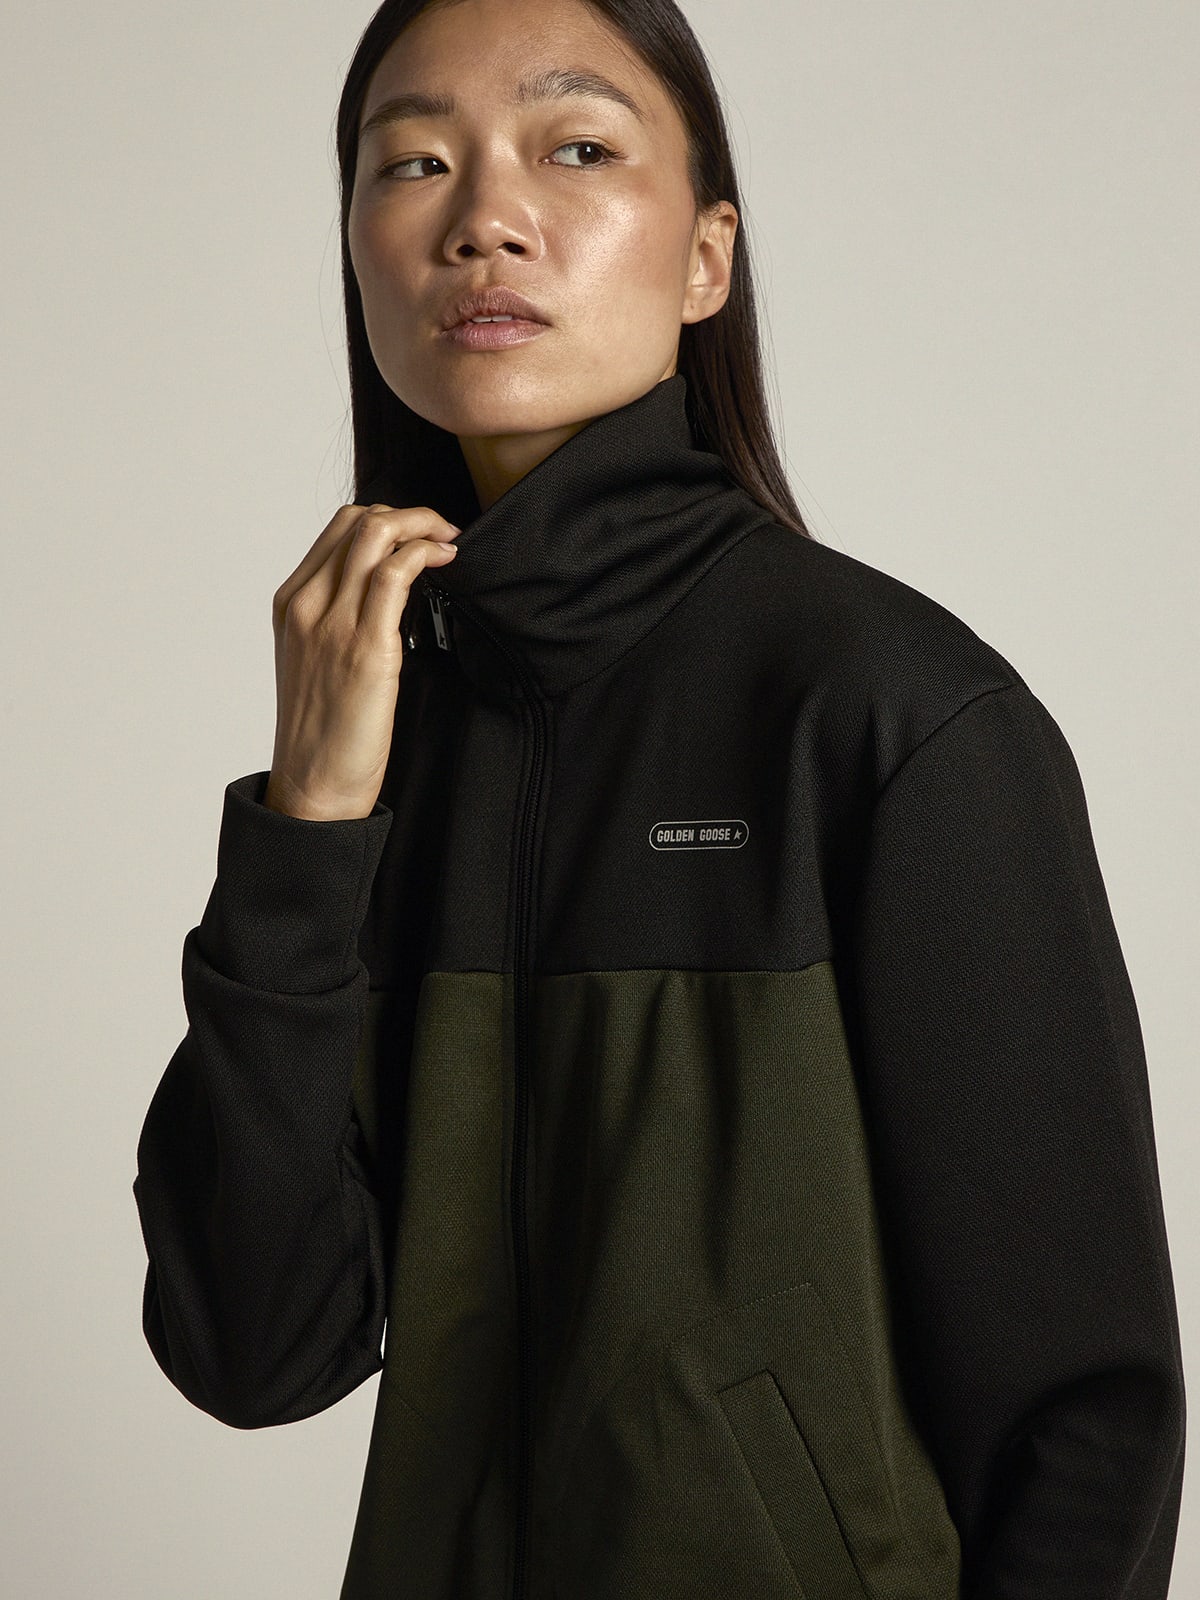 Game EDT Capsule Collection jacket in black and military-green color